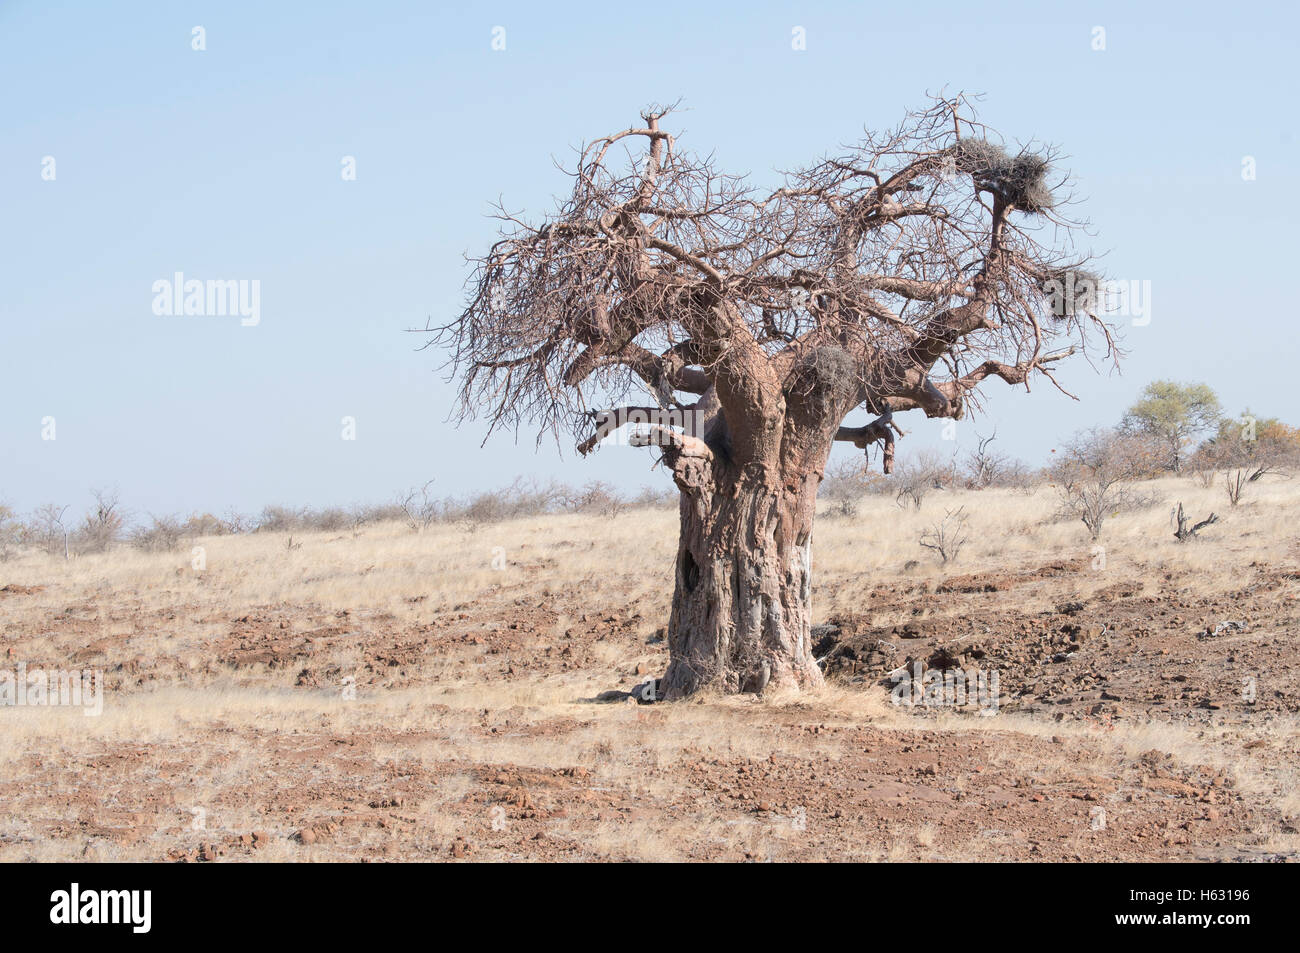 Giant Baobab Tree with Weaver Nests on an African Plain Stock Photo